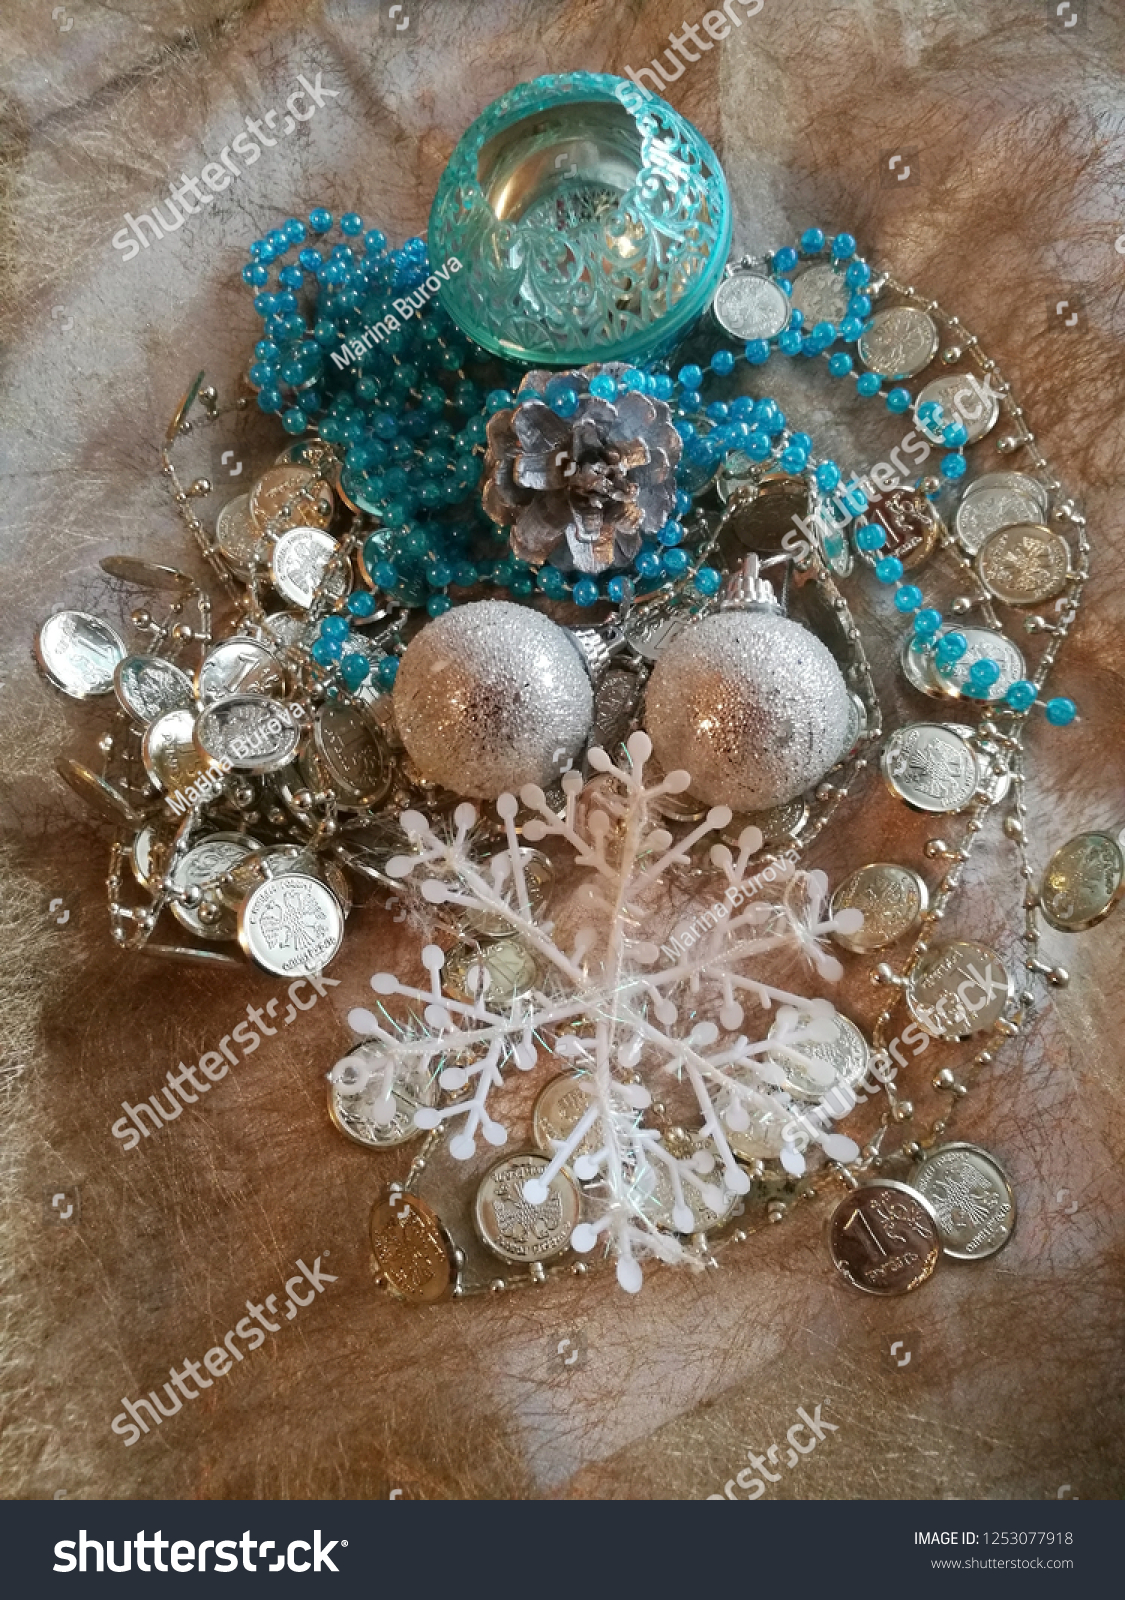 Christmas decorations in a beautiful composition bells silver snowflakes #1253077918